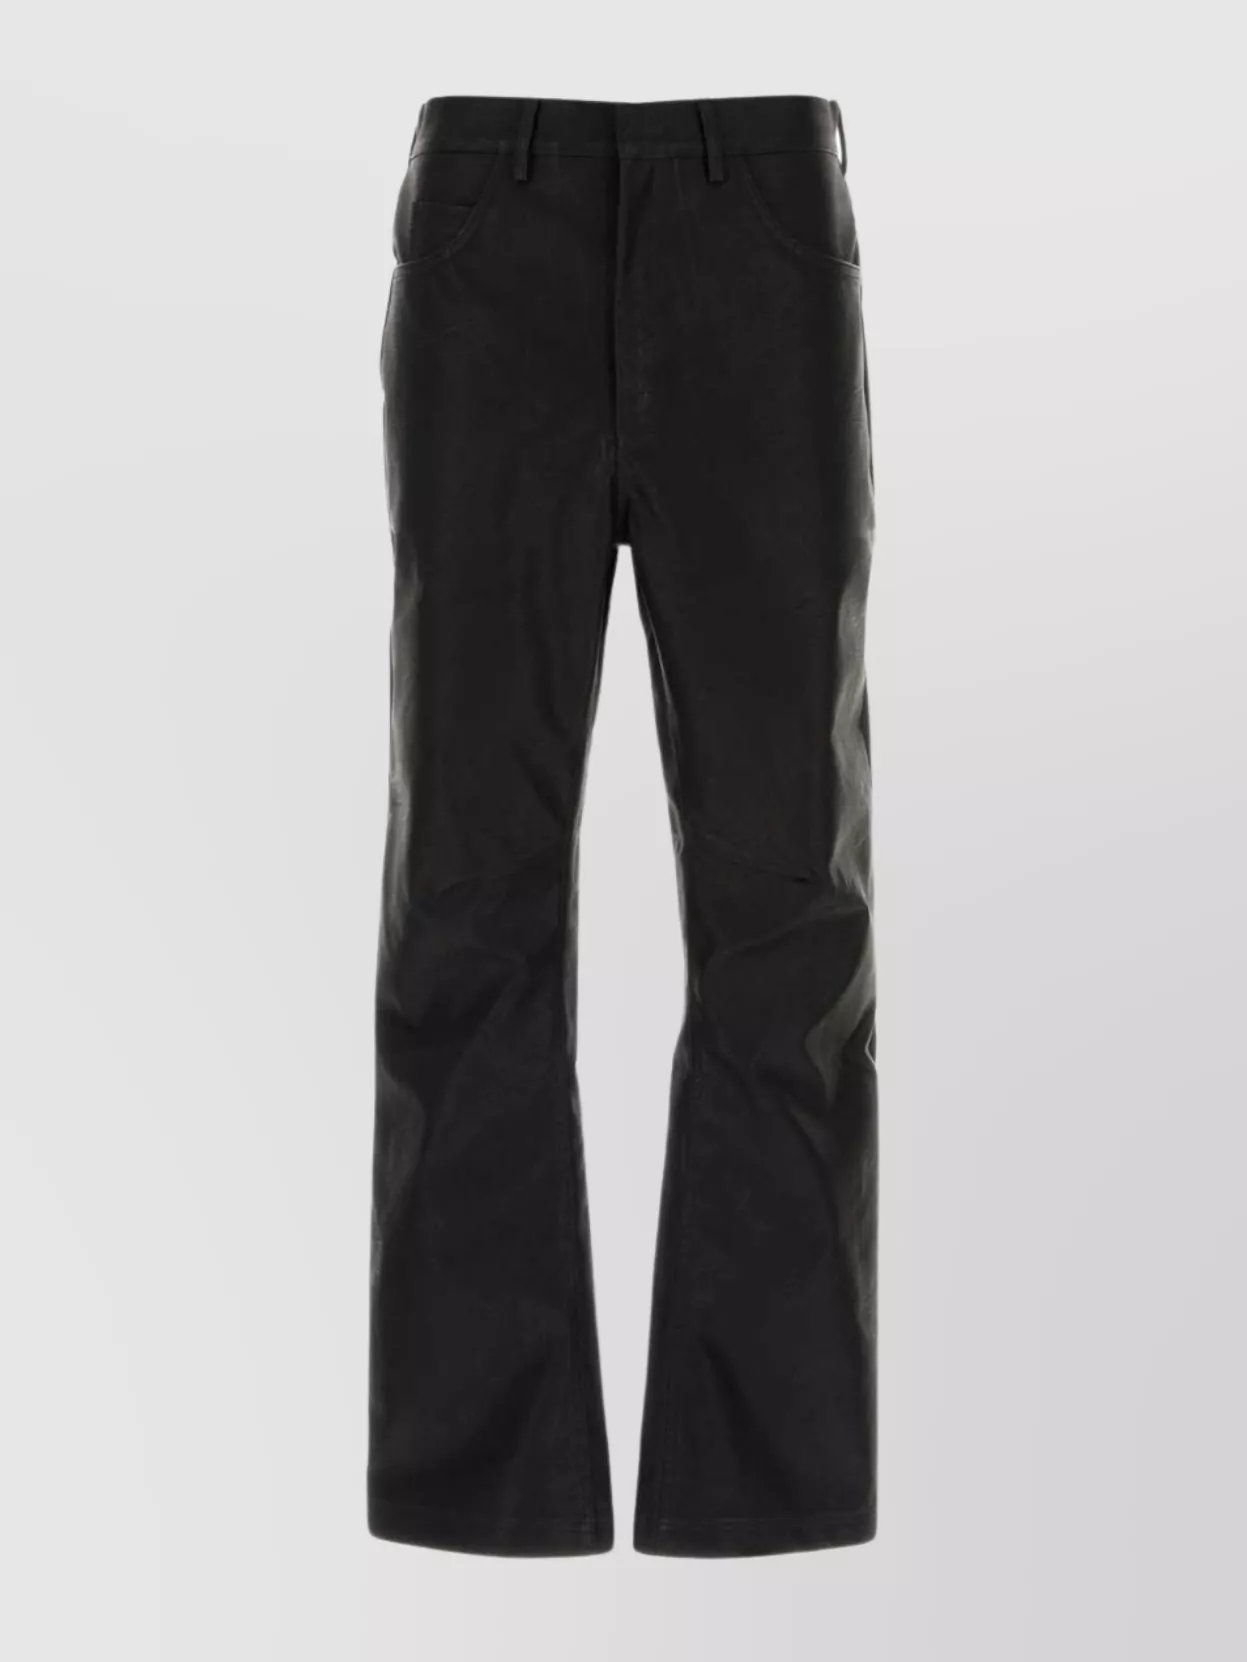 ENTIRE STUDIOS SYNTHETIC LEATHER PANT WITH BELT LOOPS AND BACK POCKETS